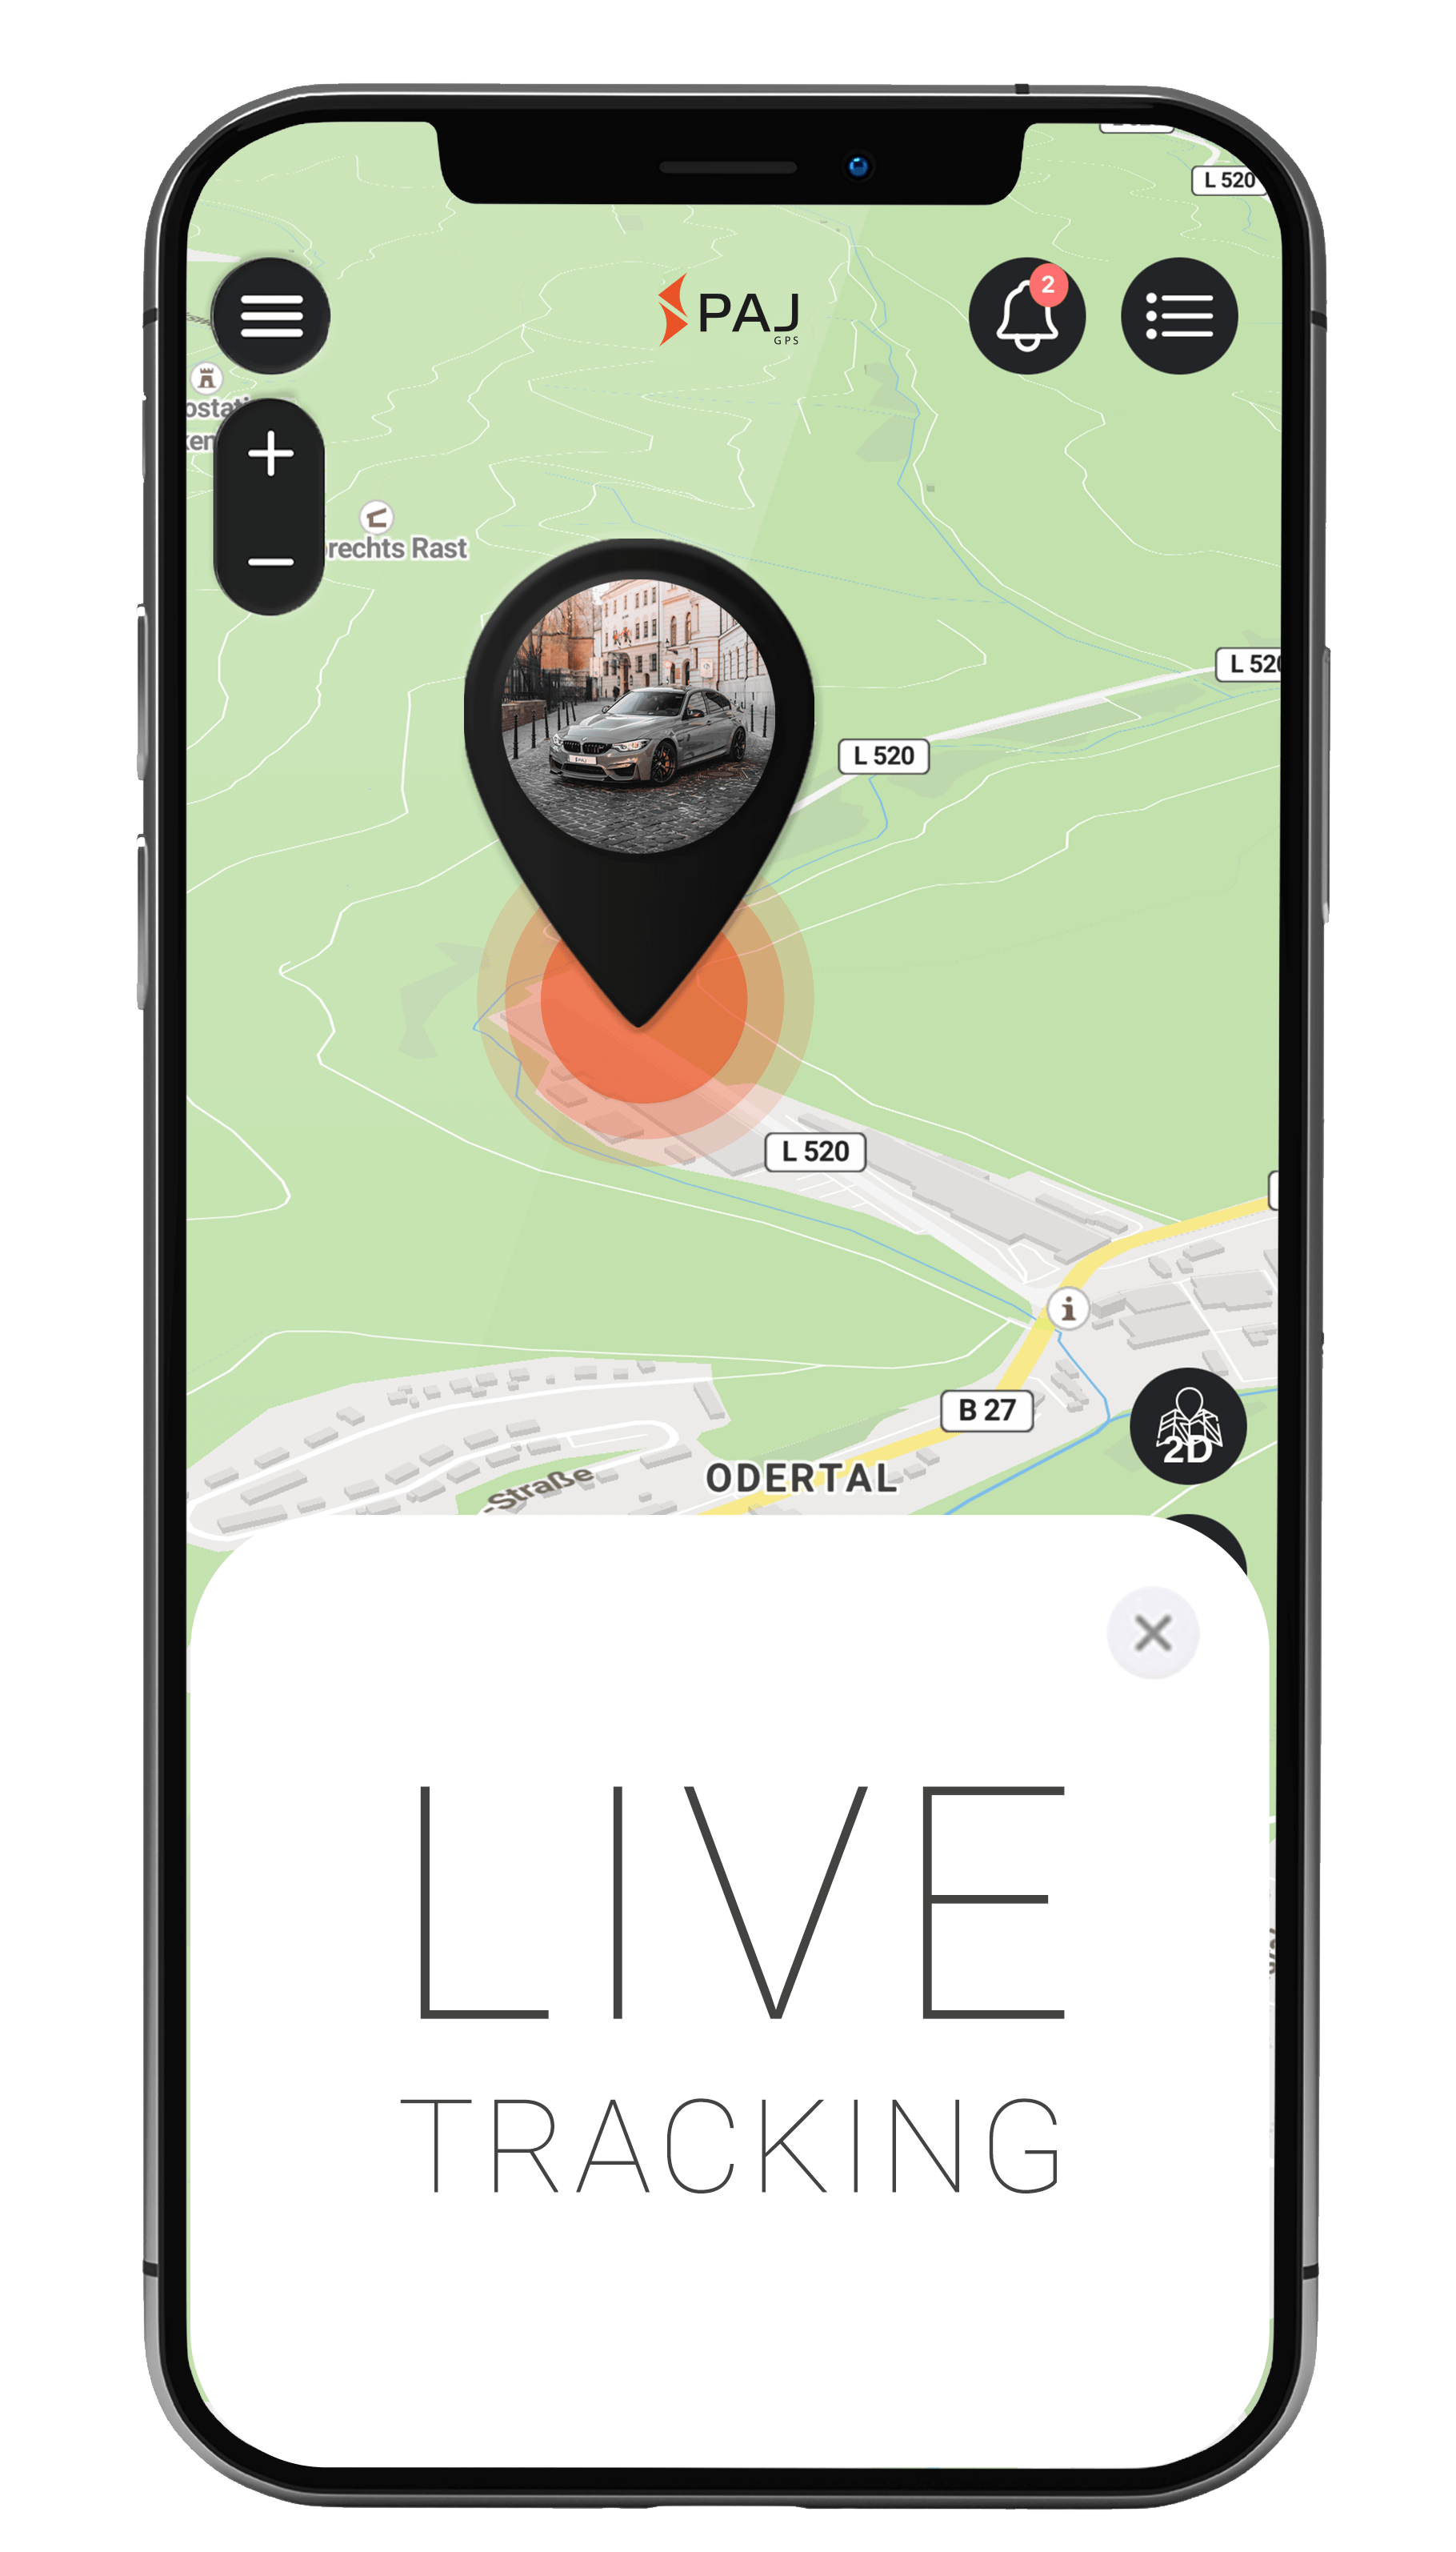 Live tracking on mobile